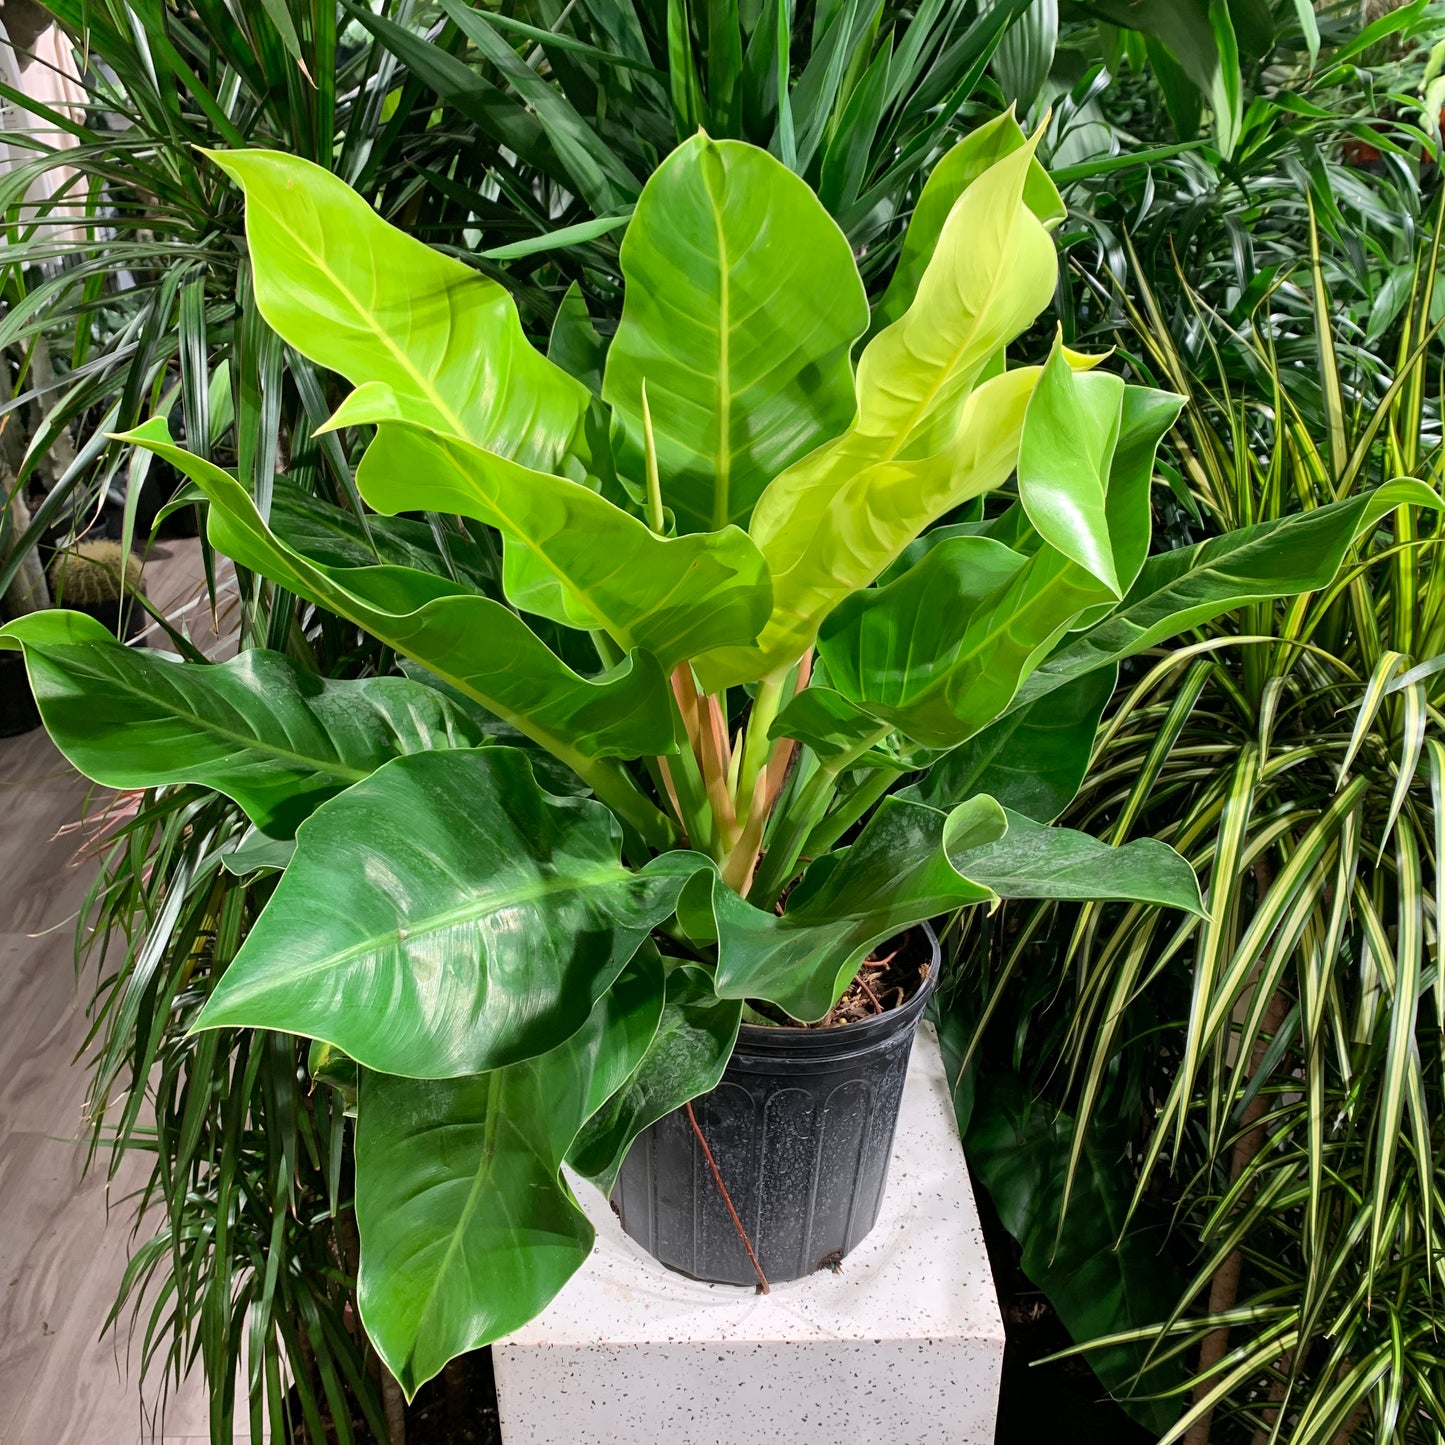 Moonlight Philo (Philodendron) in a 10 inch pot. Indoor plant for sale by Promise Supply for delivery and pickup in Toronto